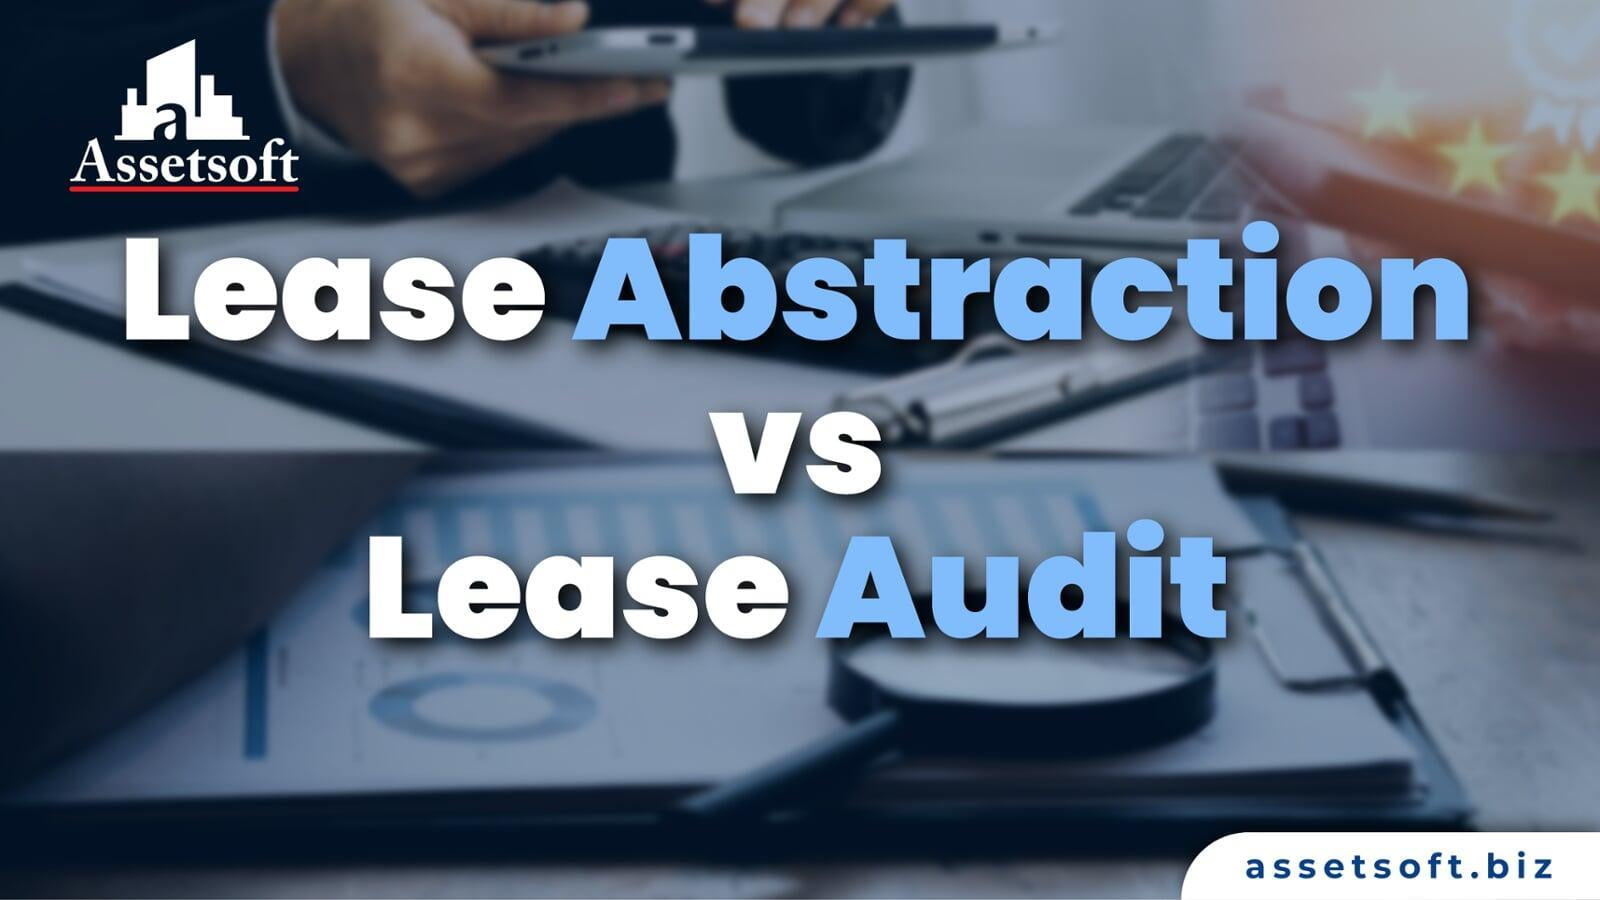 Lease Abstraction vs Lease Audit: What You Need to Know